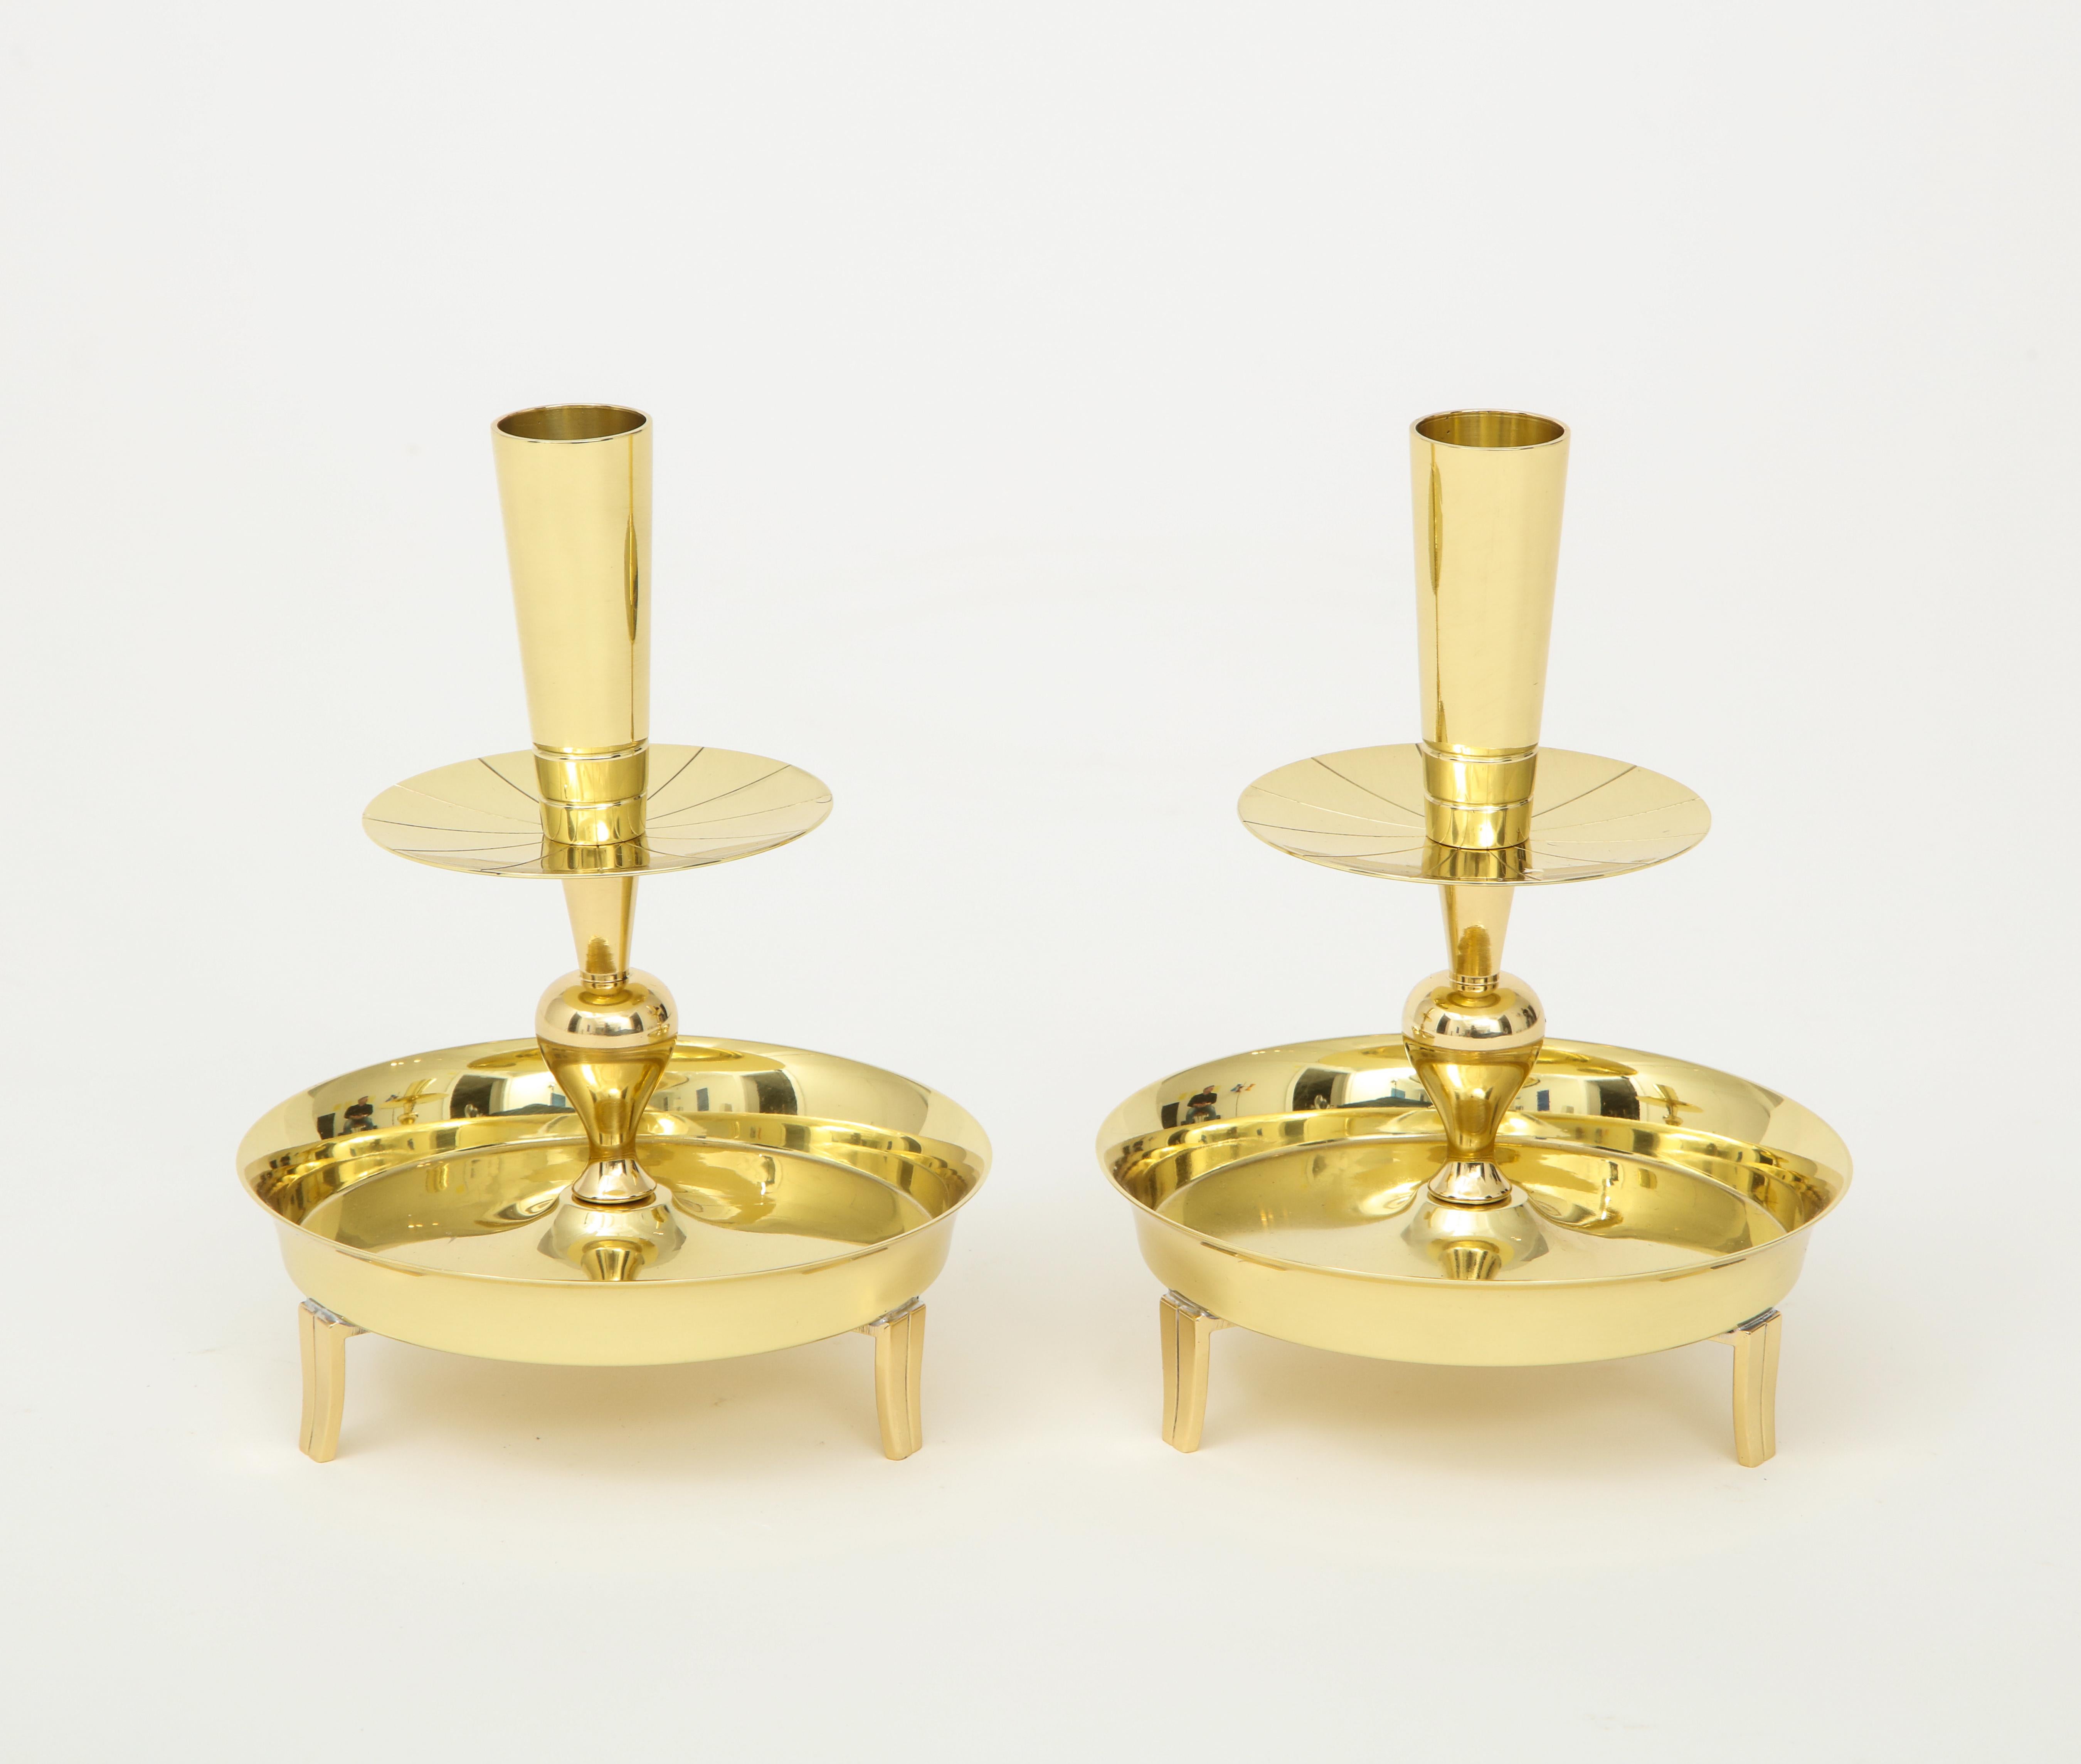 Pair of brass candlesticks with a circular base with 3 fluted legs and a tapering candleholder. Stamped on bottom. Professionally polished and lacquered.